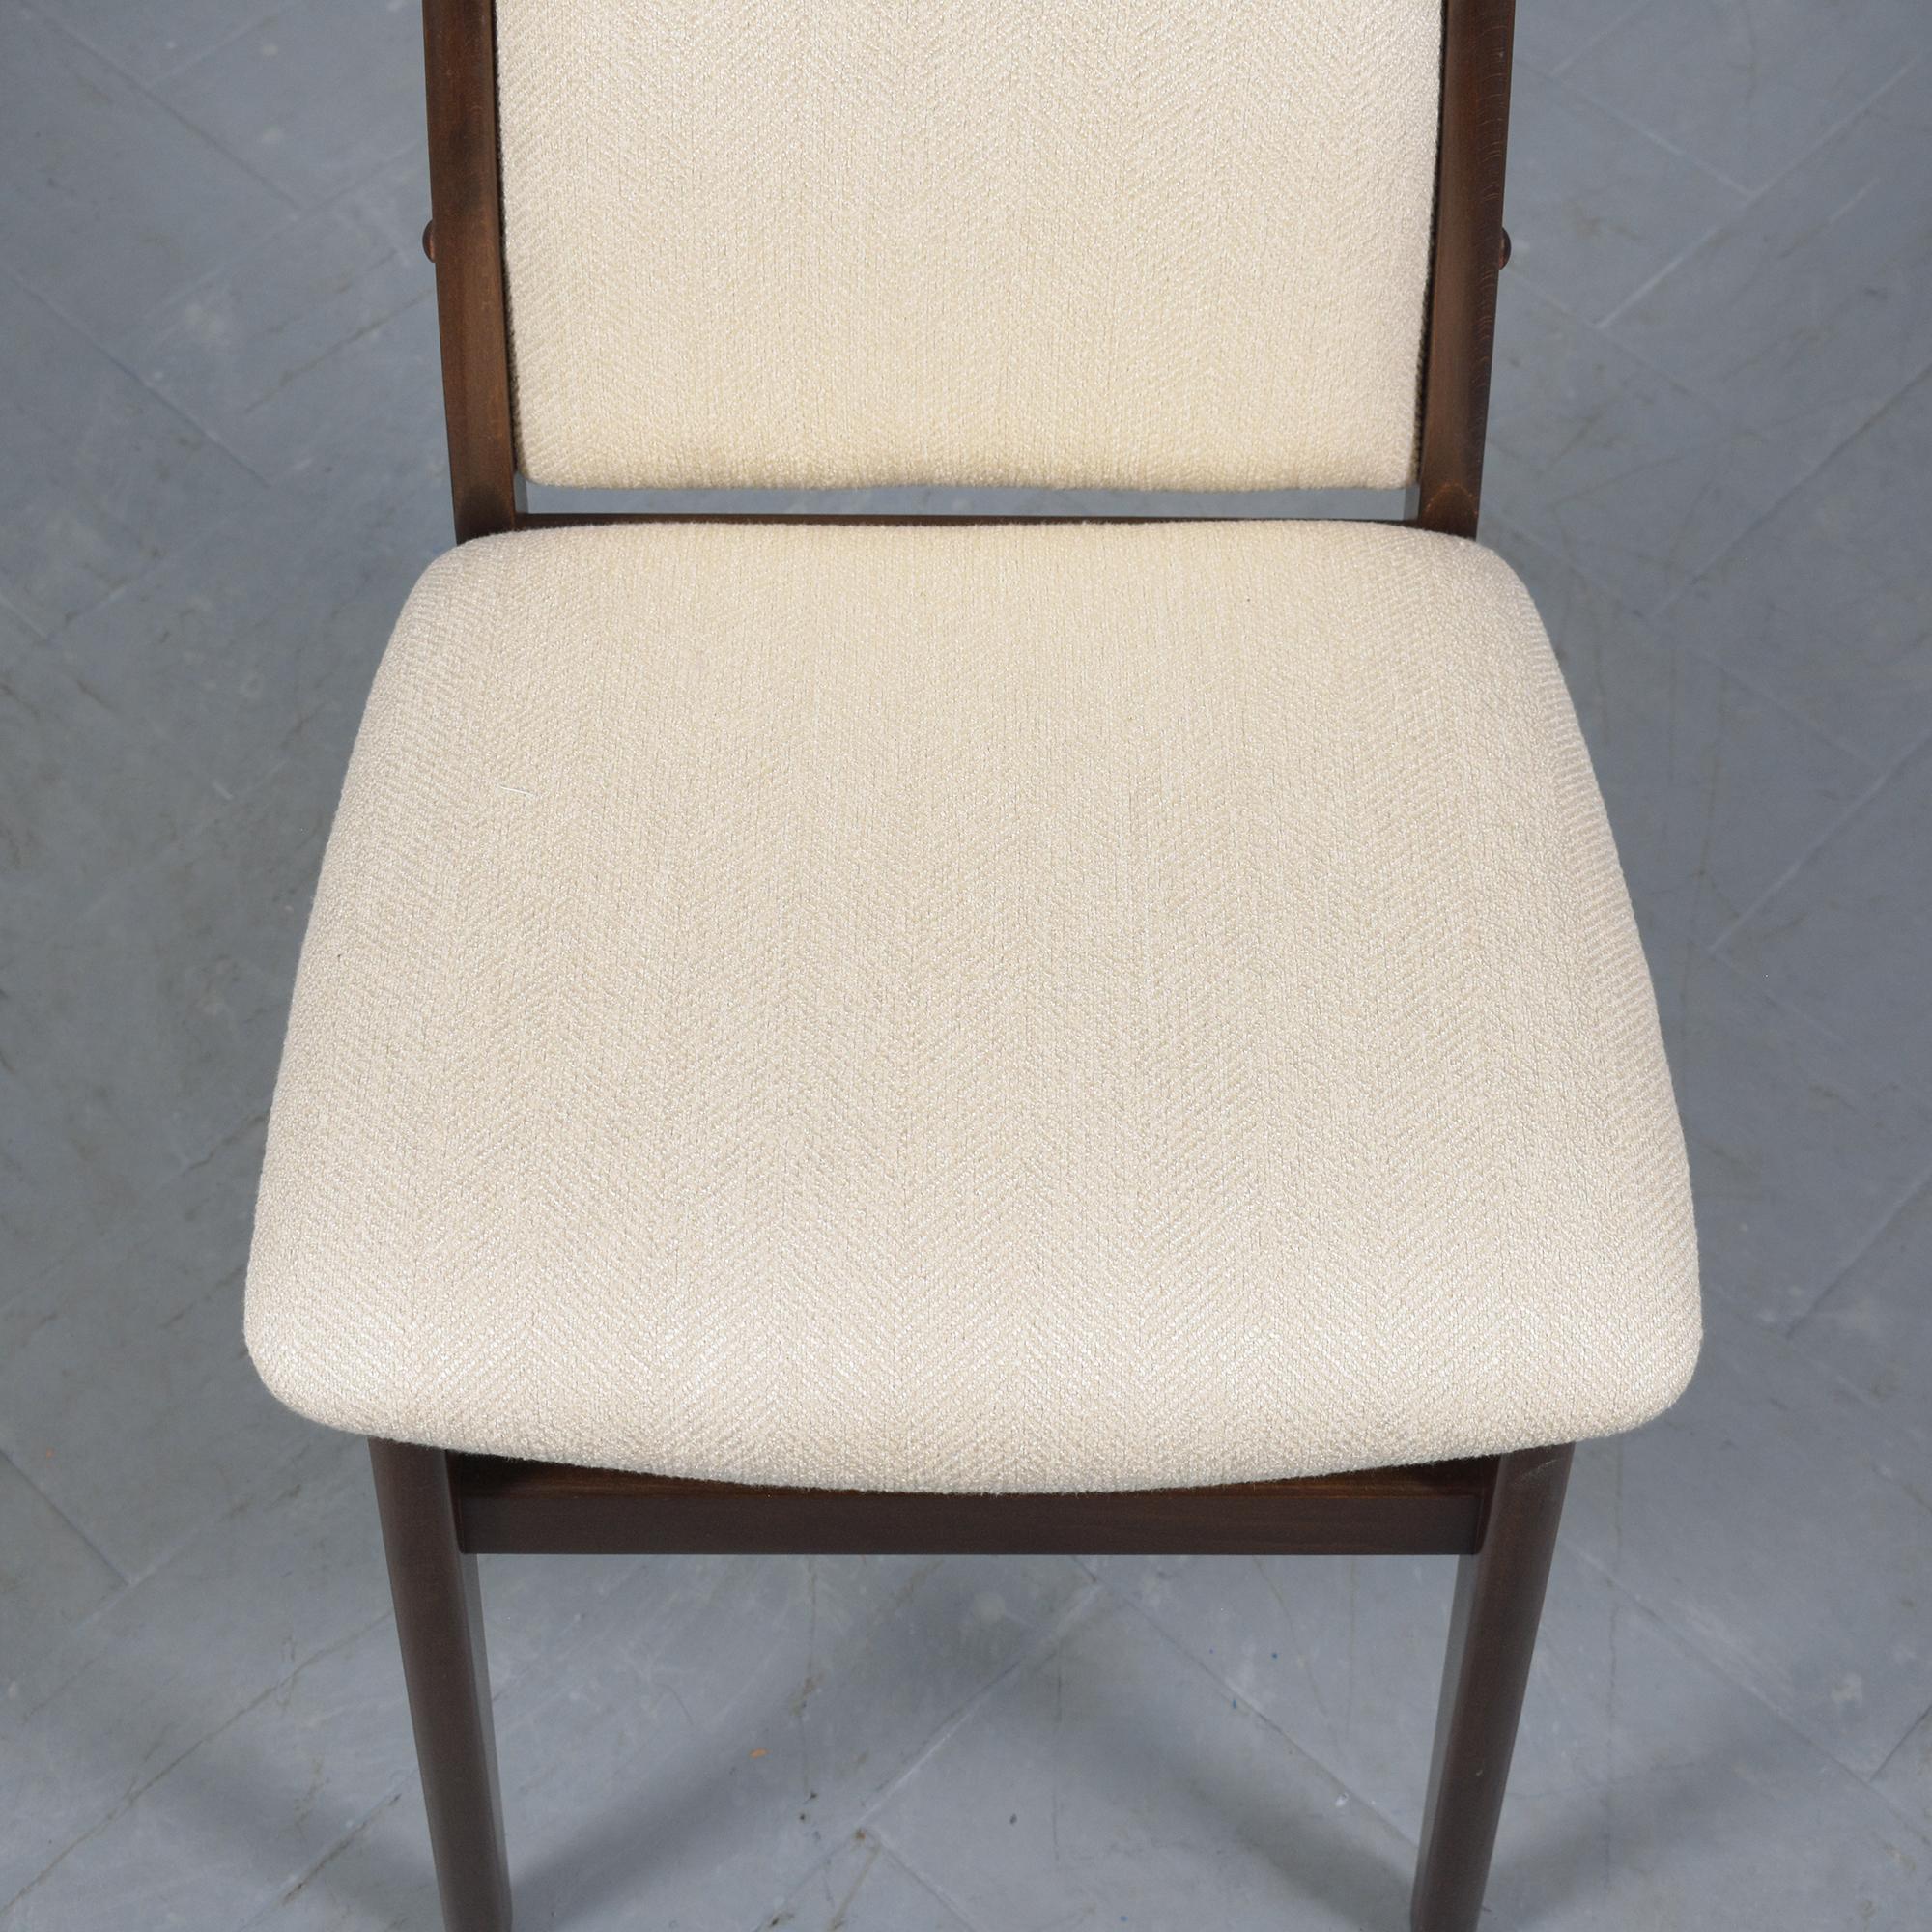 Mid-20th Century Exquisite Danish Teak Dining Chairs, Restored and Refined For Sale